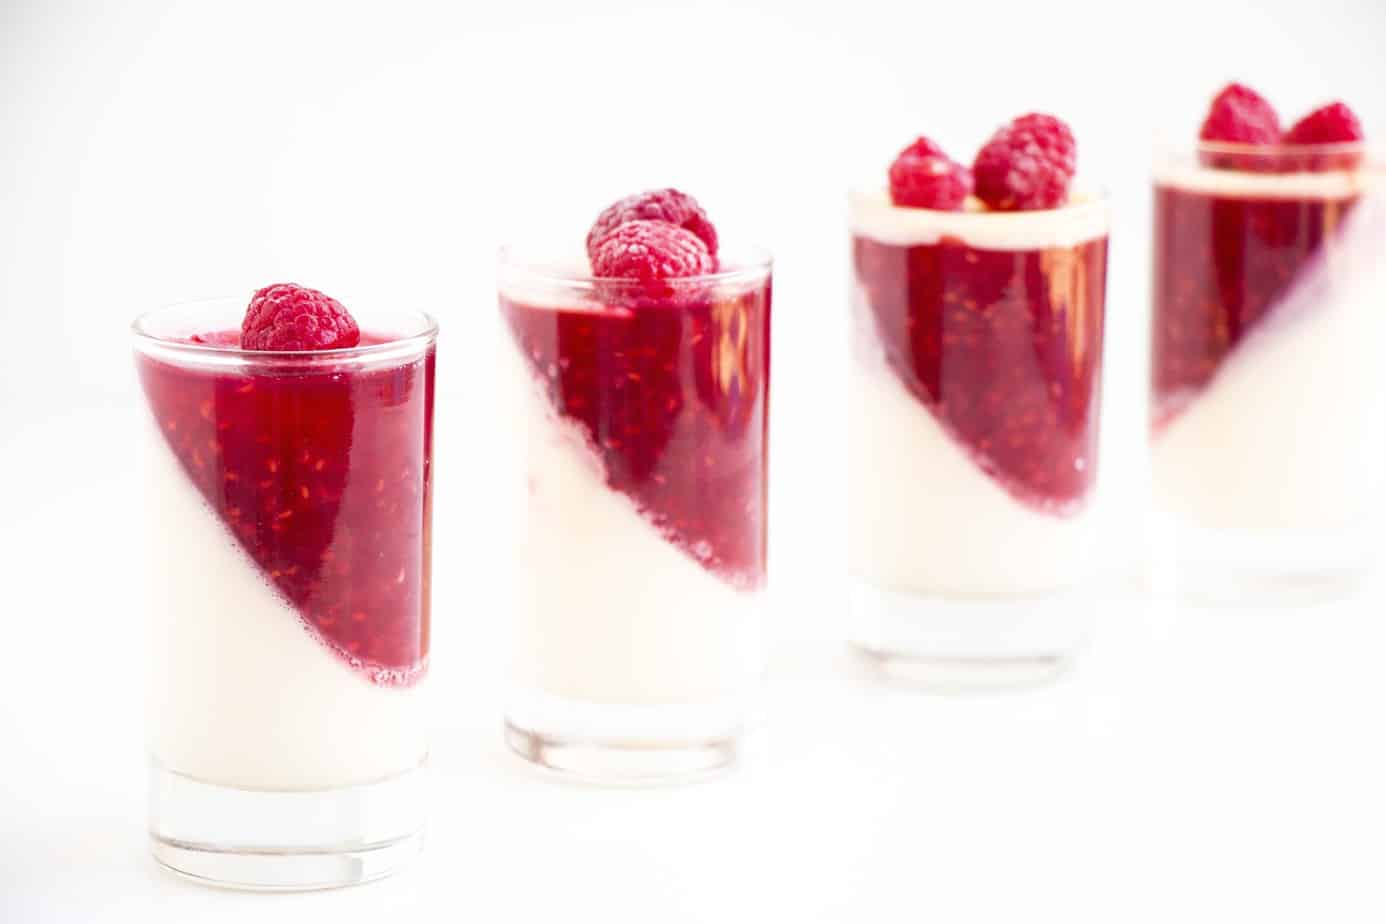 Vanilla Panna cottas topped with raspberry jelly and fresh raspberries.